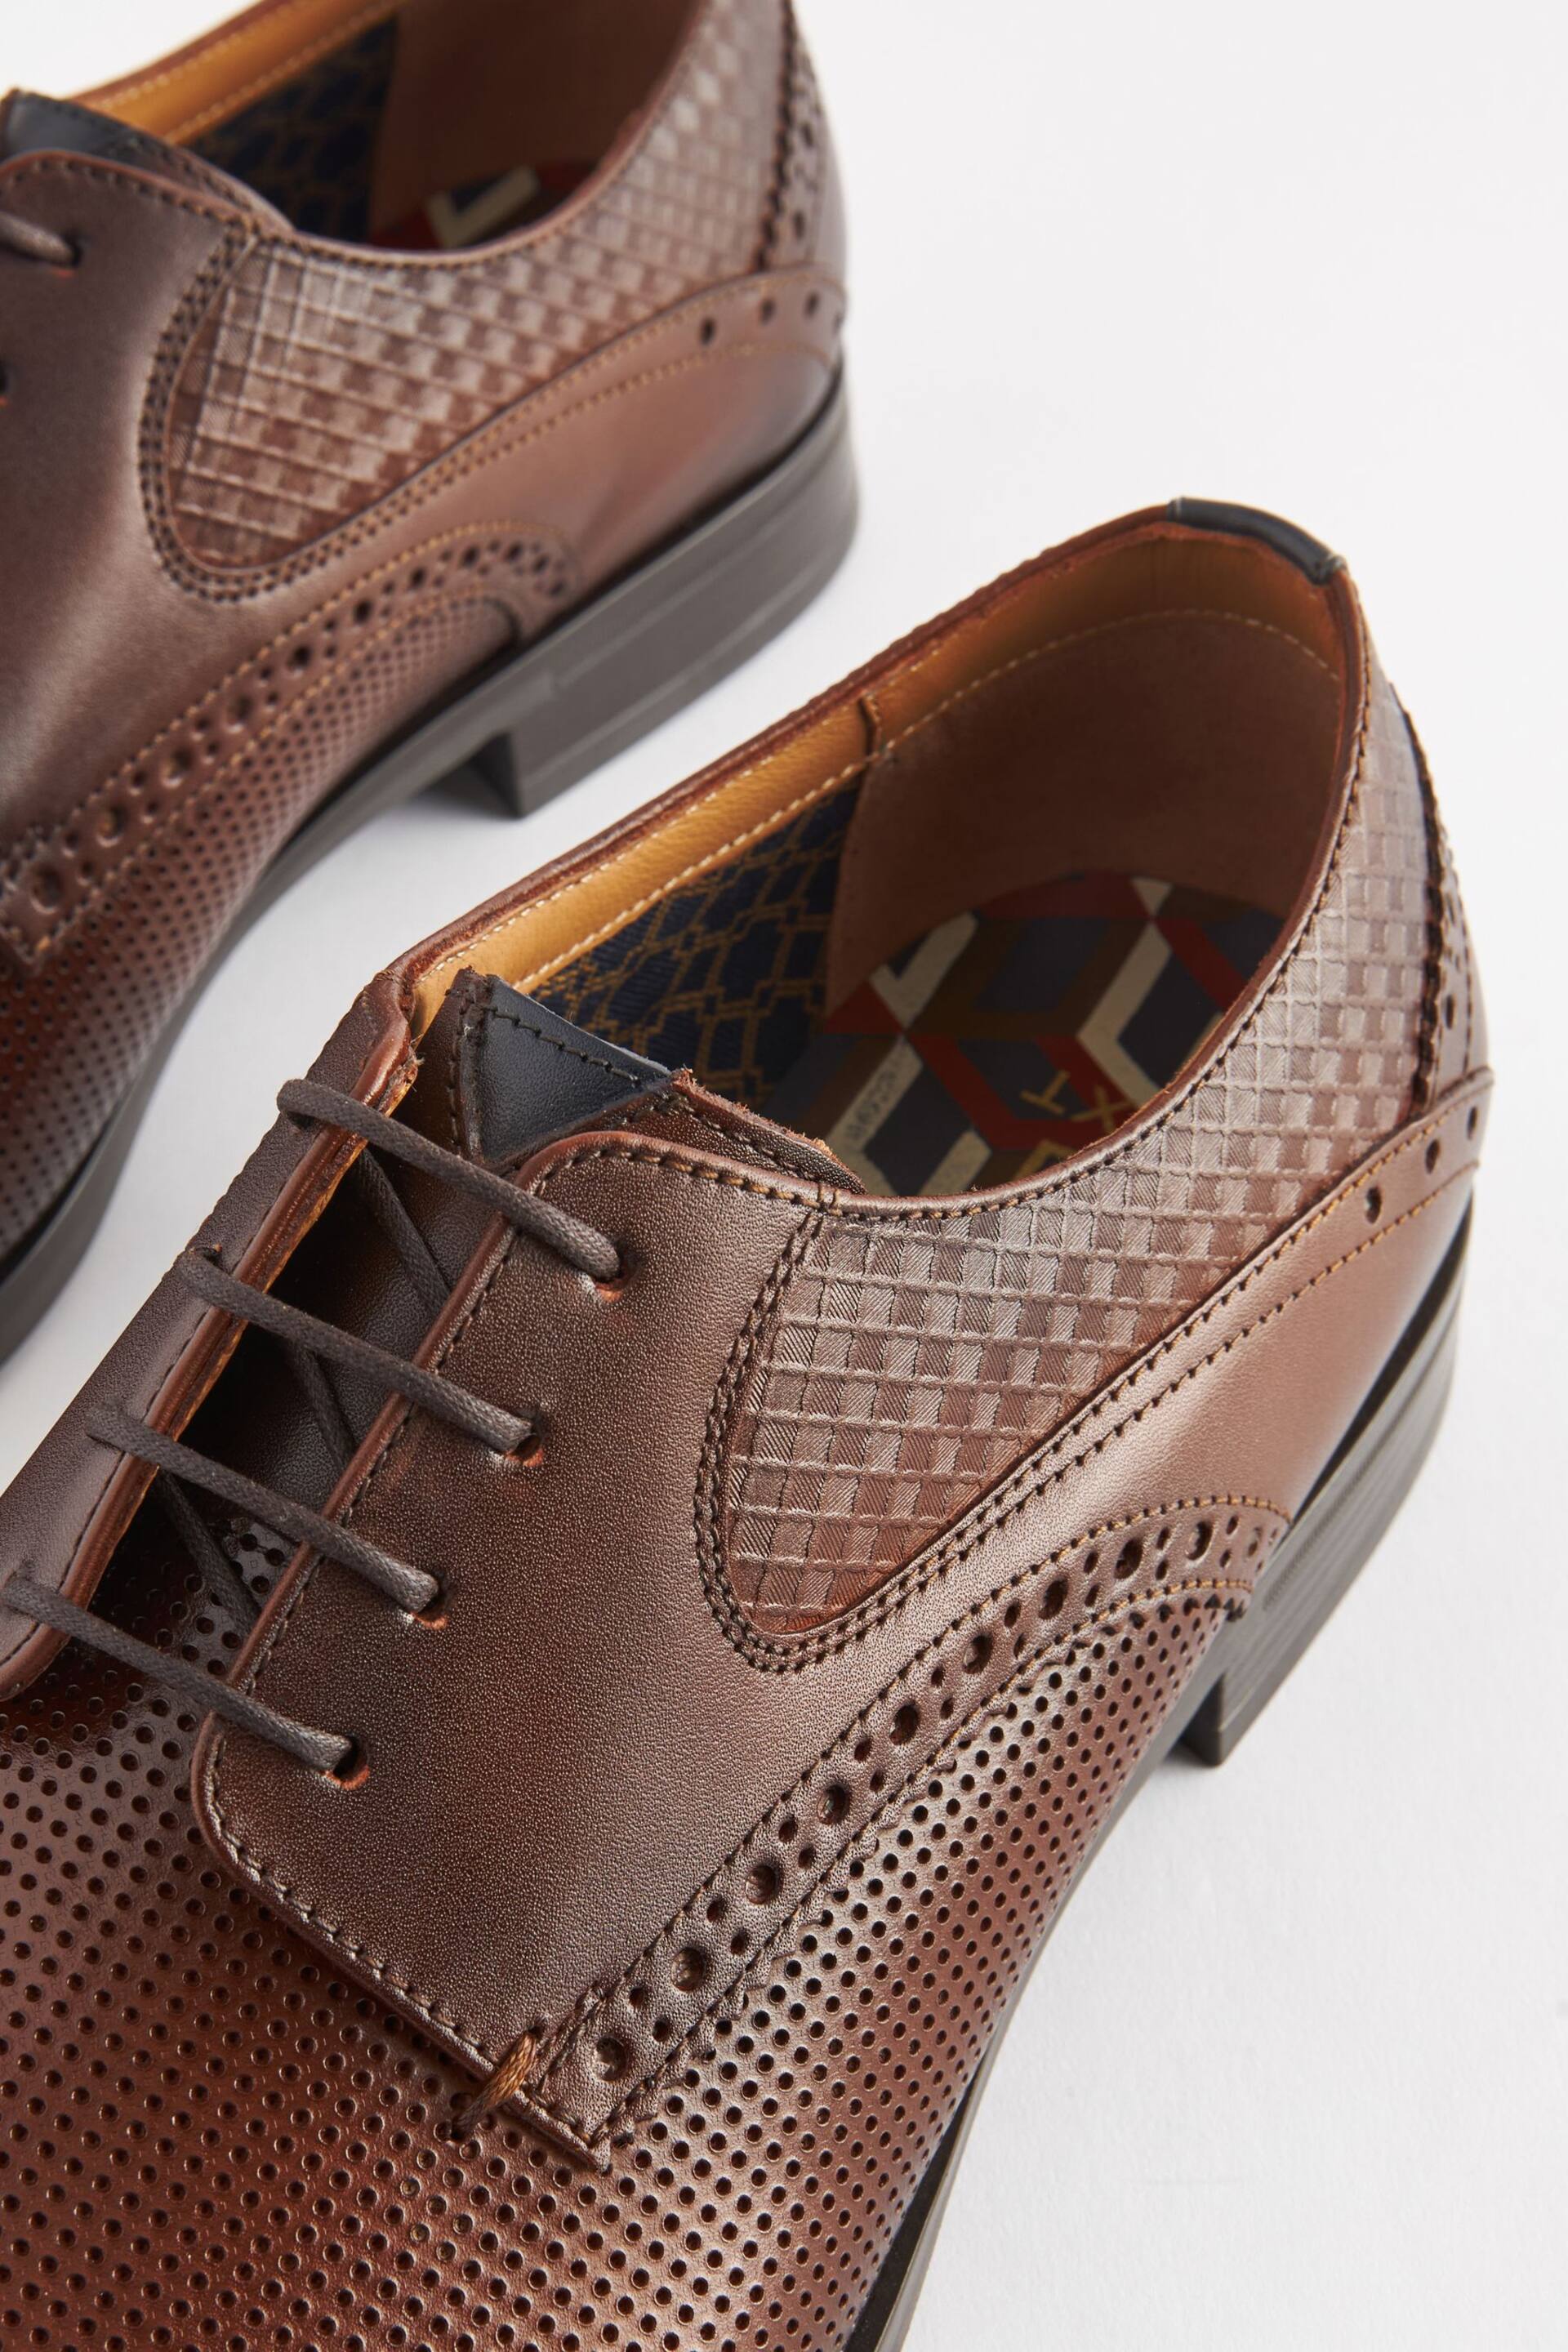 Brown Leather Embossed Brogues Shoes - Image 5 of 7